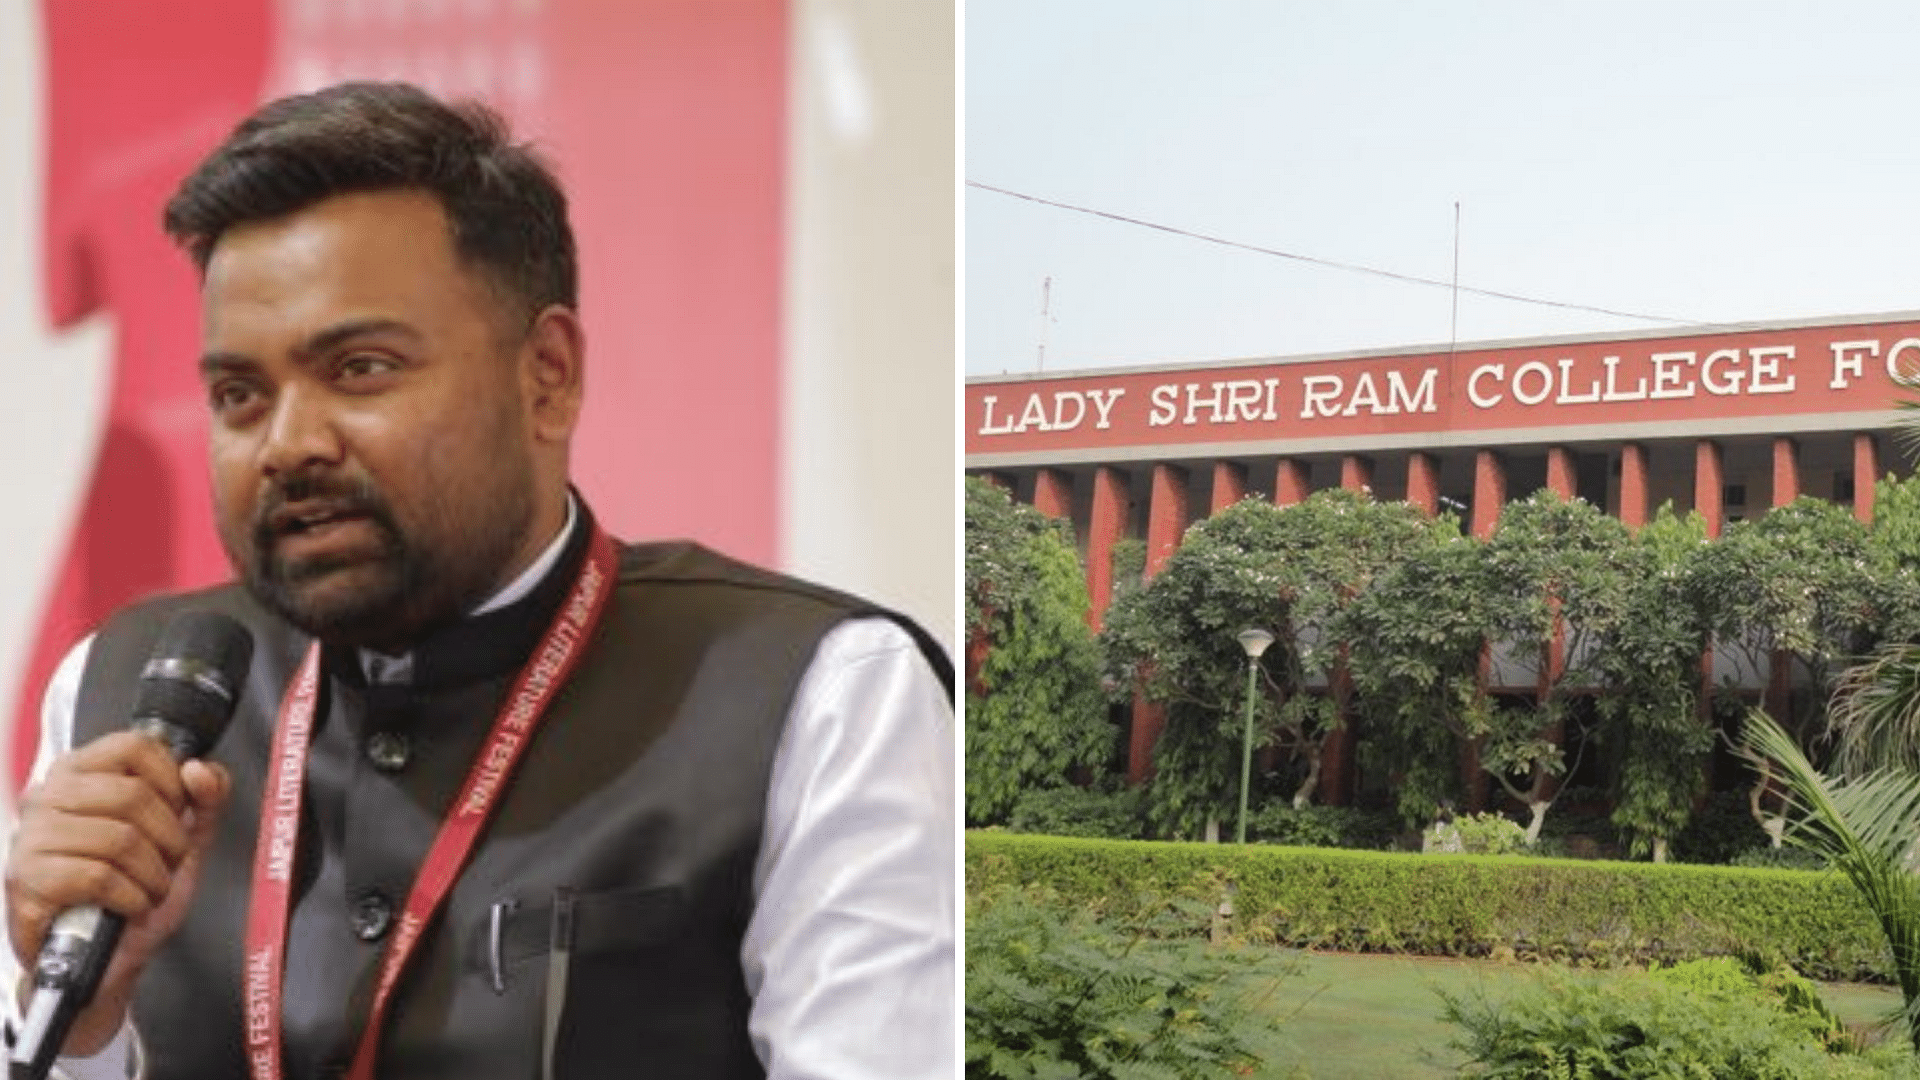 <div class="paragraphs"><p>A controversy emerged after Lady Shri Ram College for Women (LSR) rescinded the invitation given to a BJP leader to deliver a talk at the institute on Ambedkar Jayanti, with the party's national spokesperson Guru Prakash Paswan on Thursday, 14 April, saying the withdrawal was a symptom of "intolerance."</p></div>